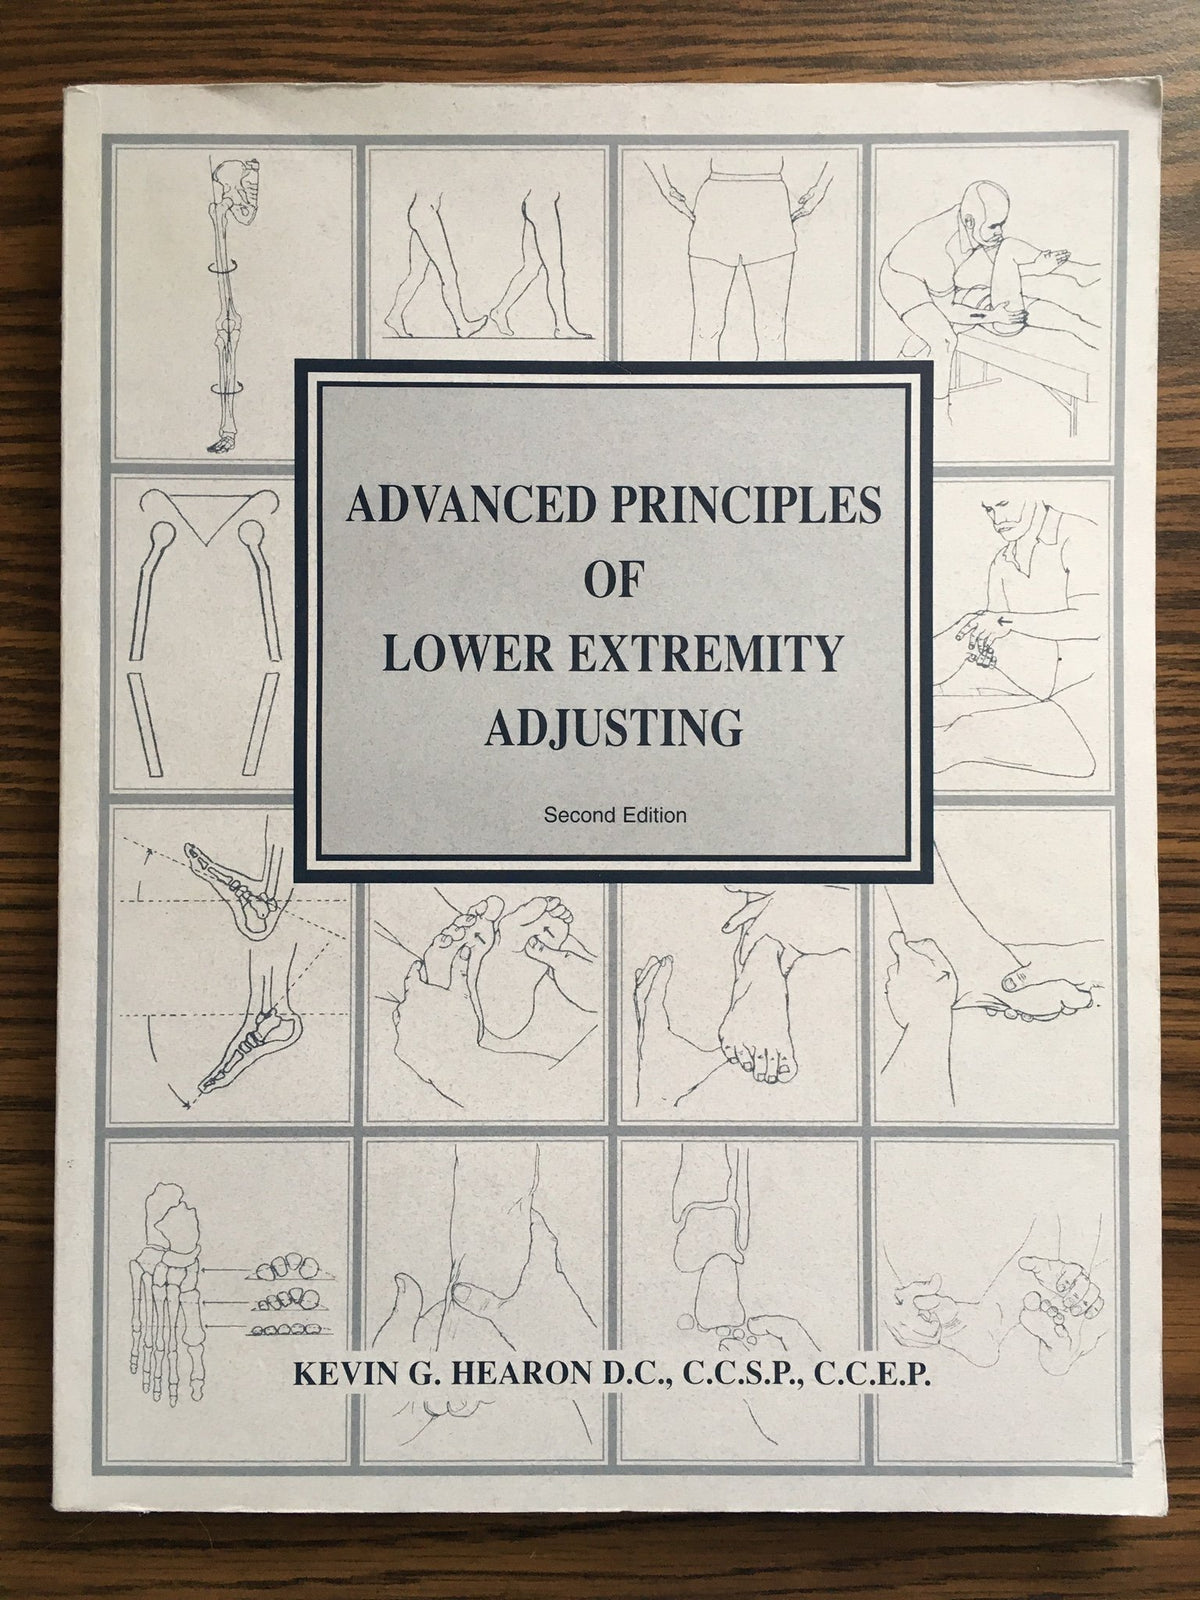 Advanced Principles of Lower Extremity Adjusting by Kevin G Hearon